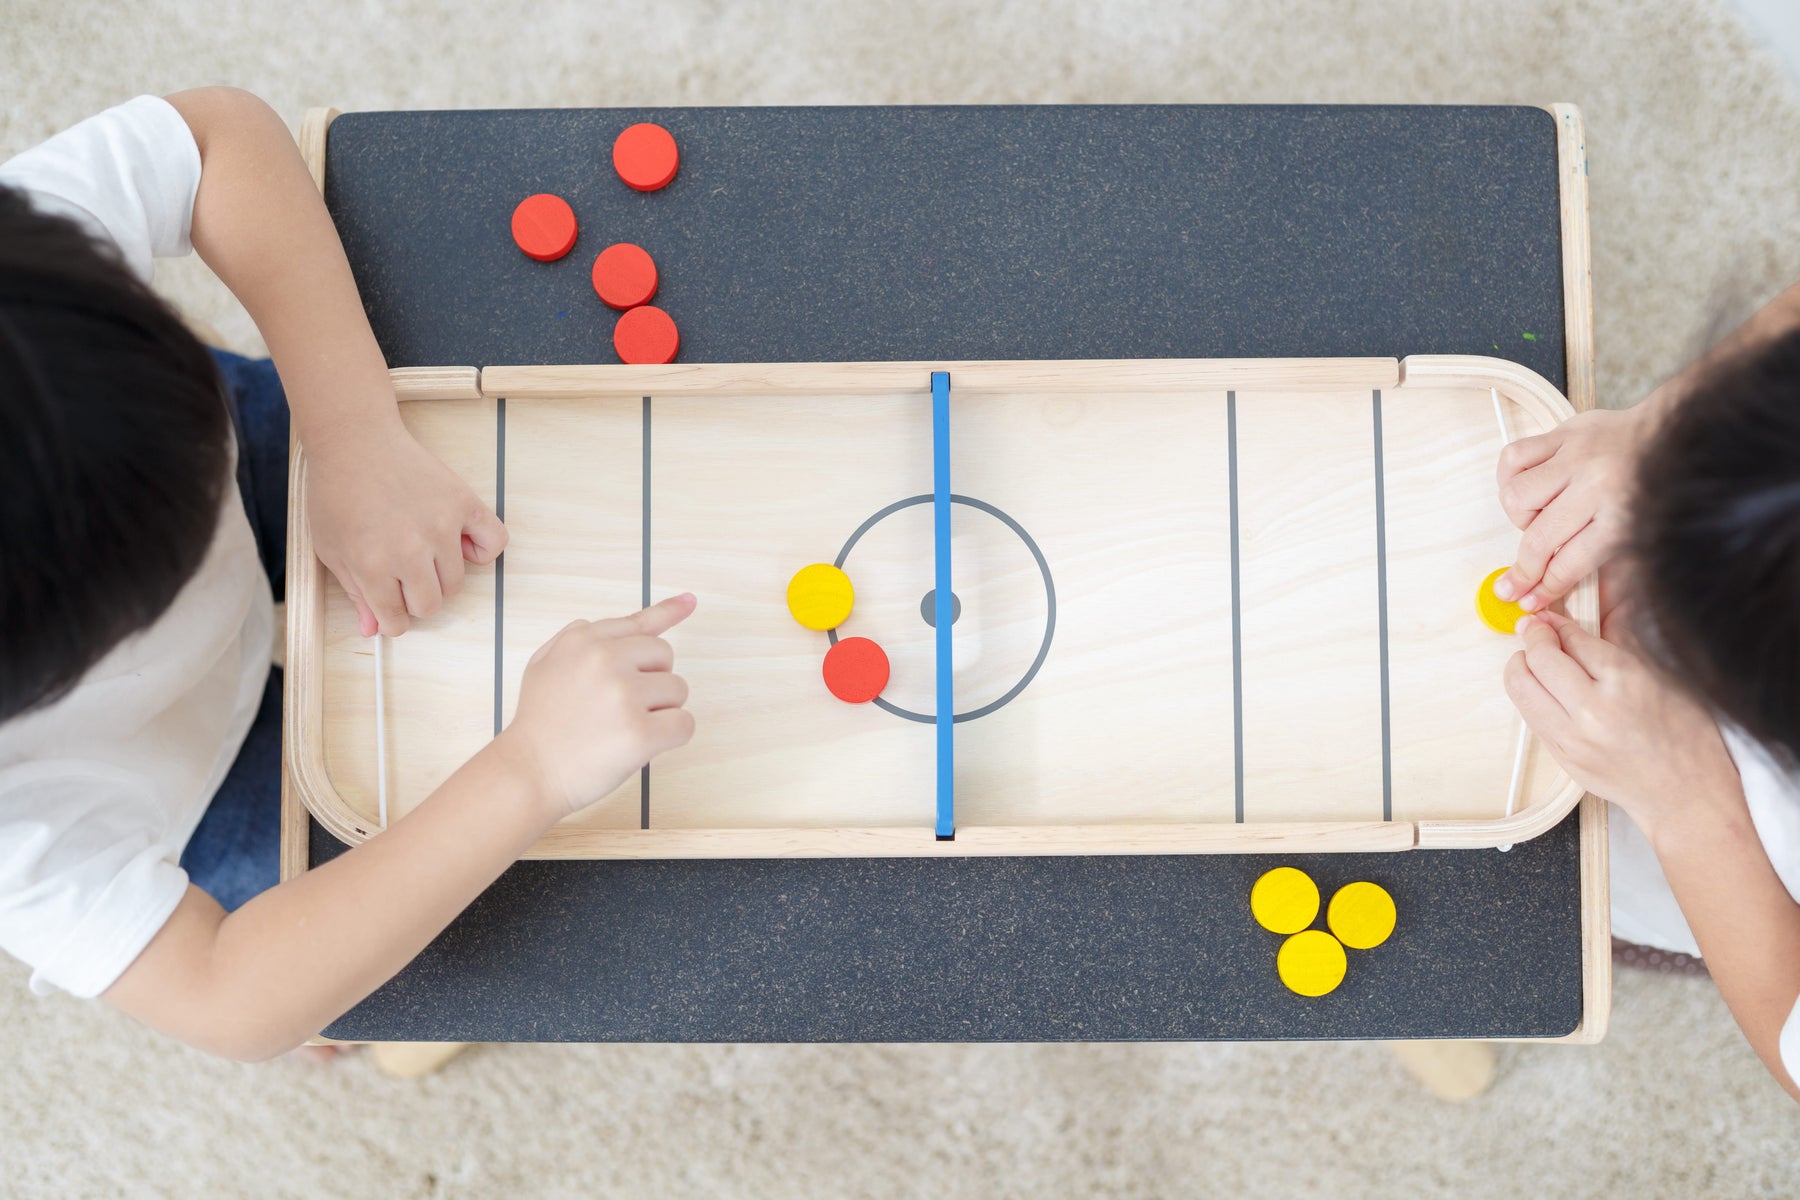 Shuffle Zone Shuffleboard Family Game with Oxford Mat and Rolling